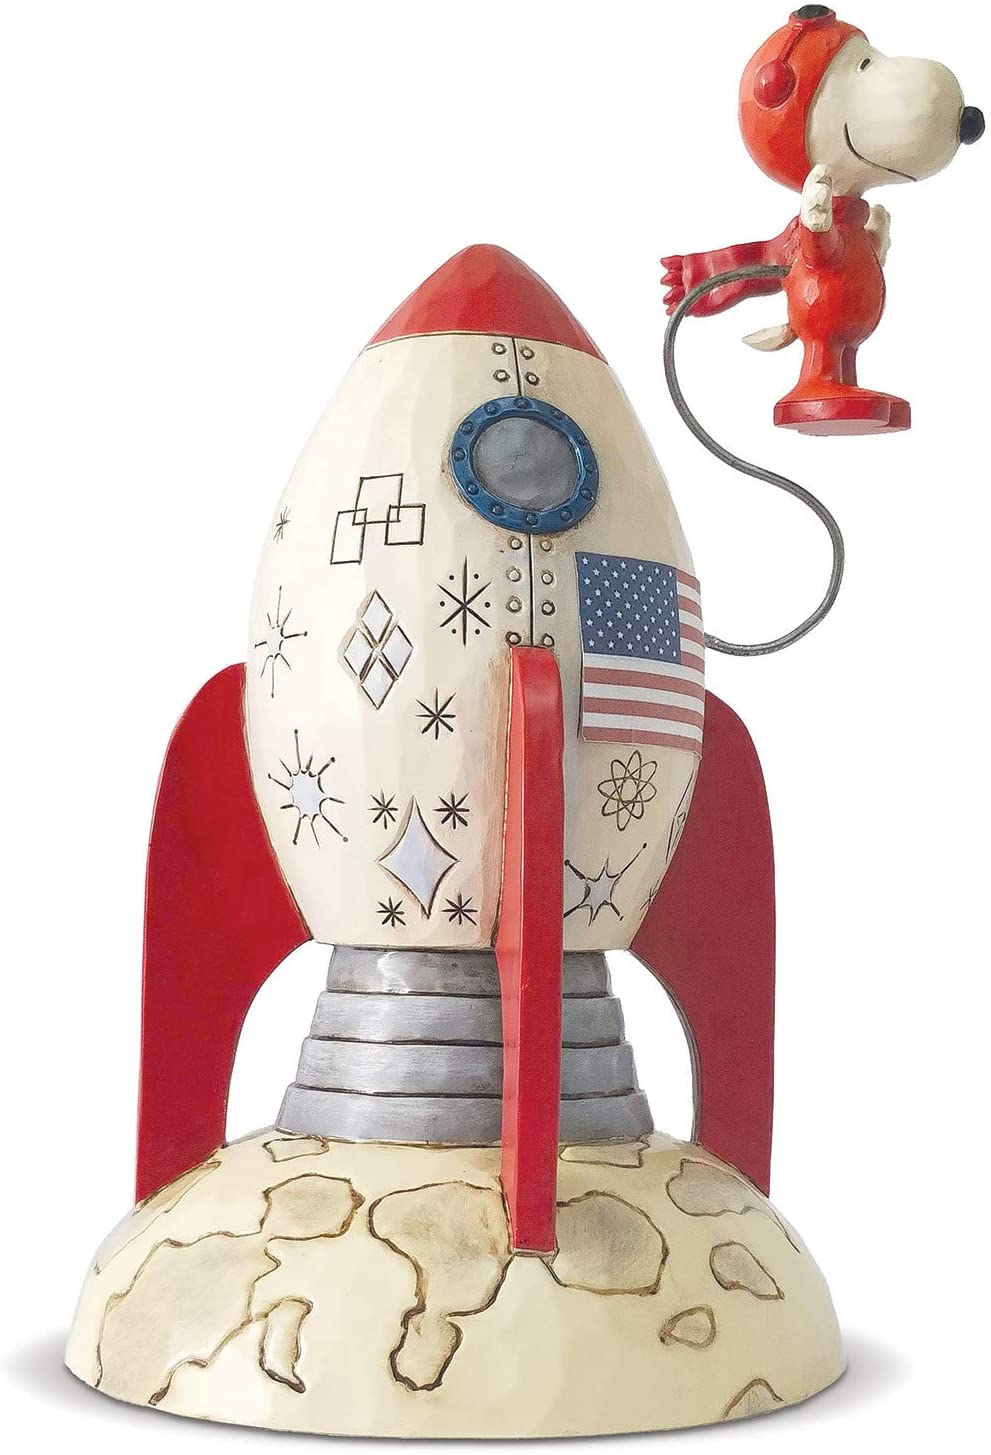 Peanuts - Snoopy Astronaut Spaceship Figurine from Jim Shore by Enesco D56